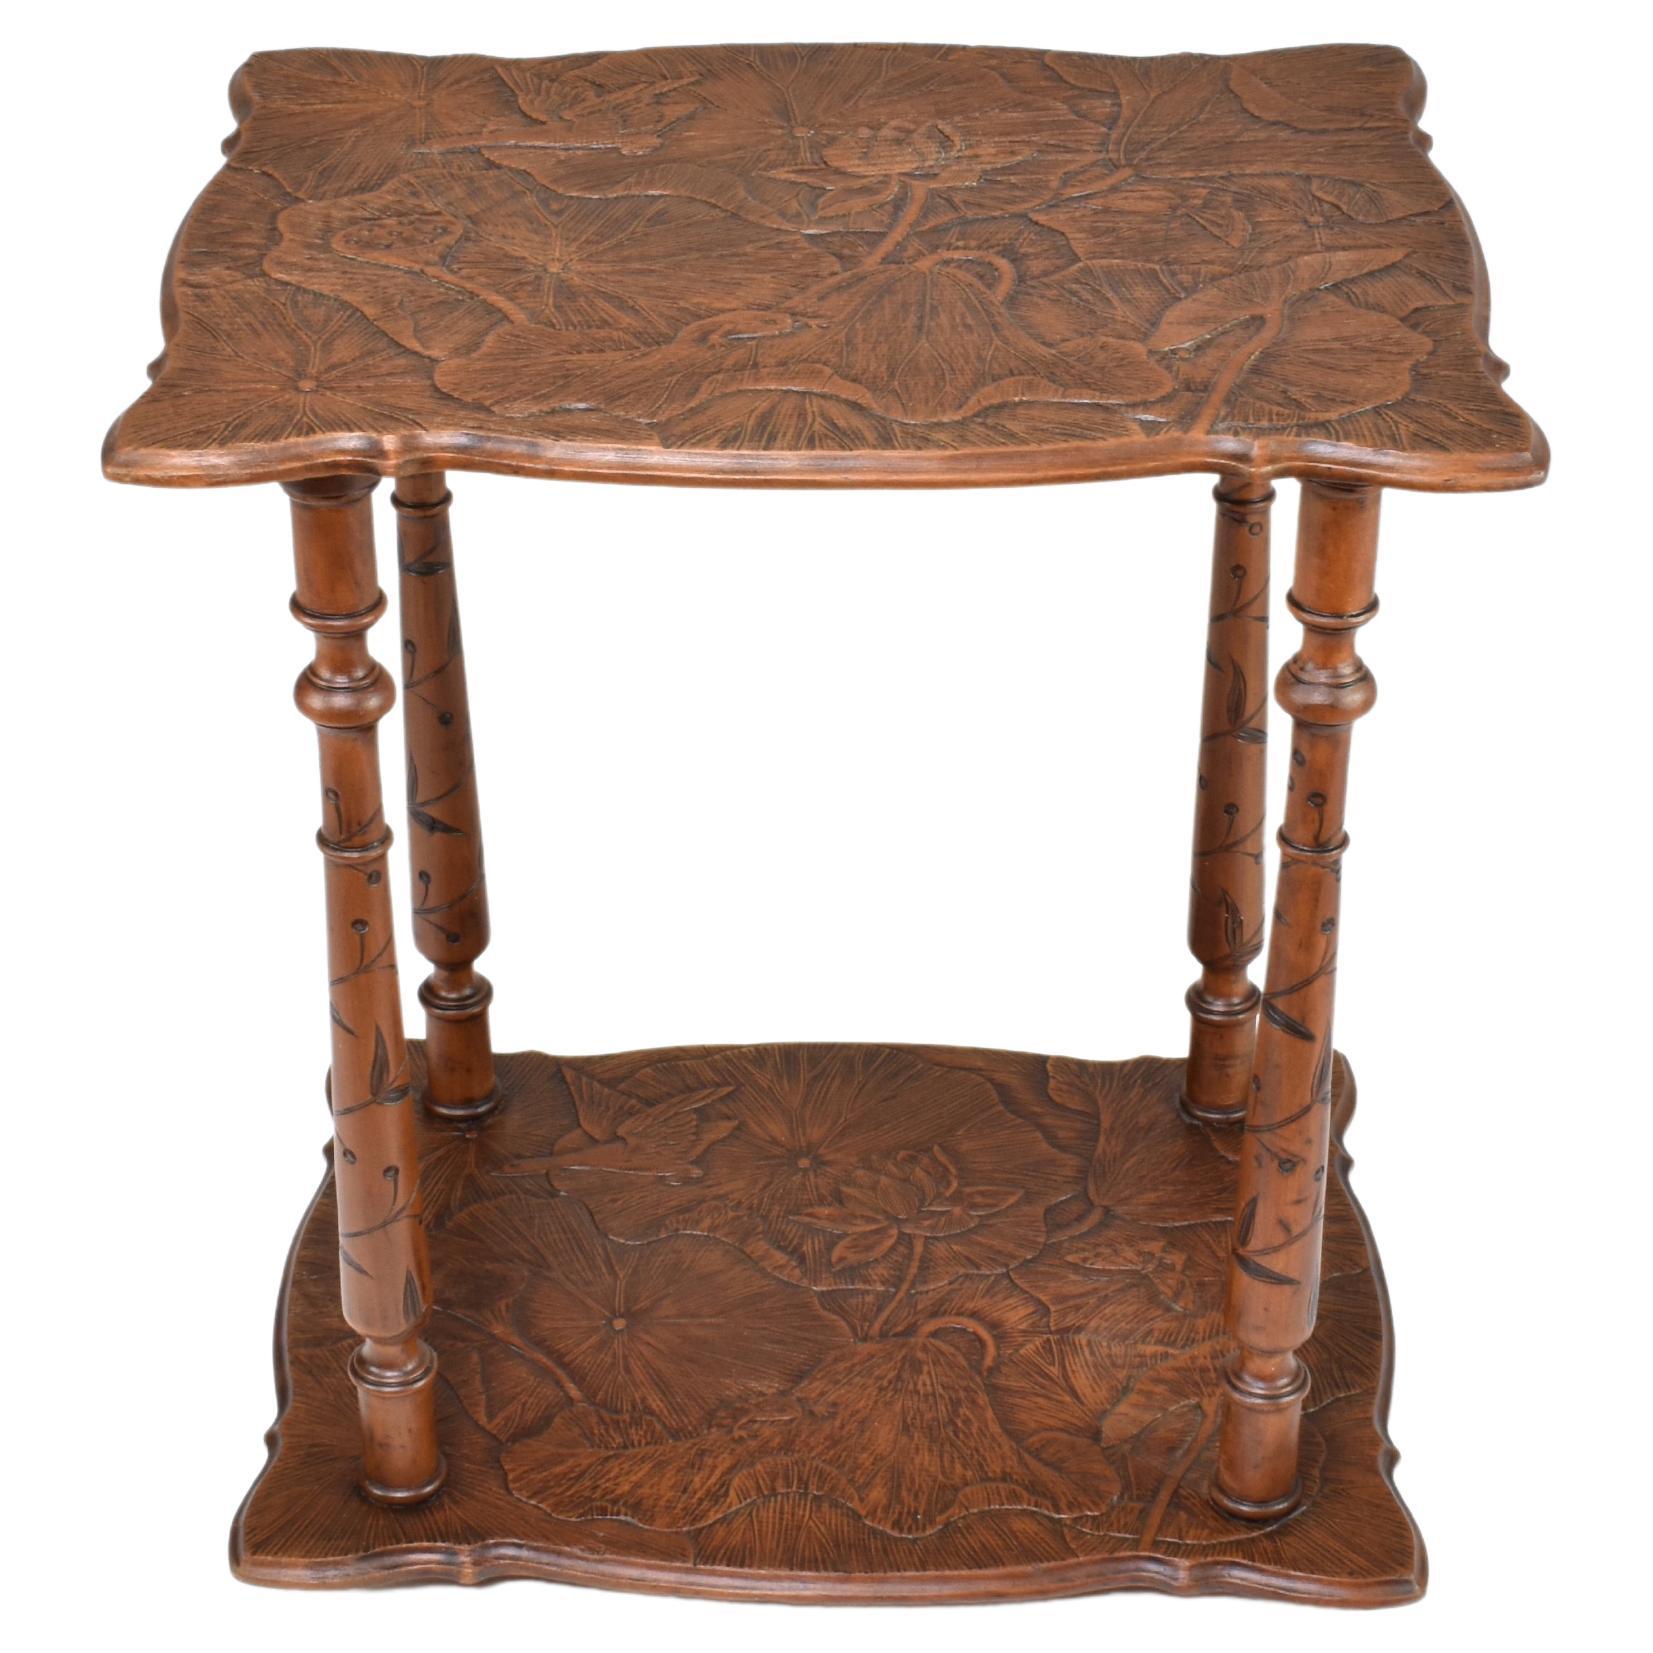 1900's Japanese Sculpted Wooden Tea Table For Sale